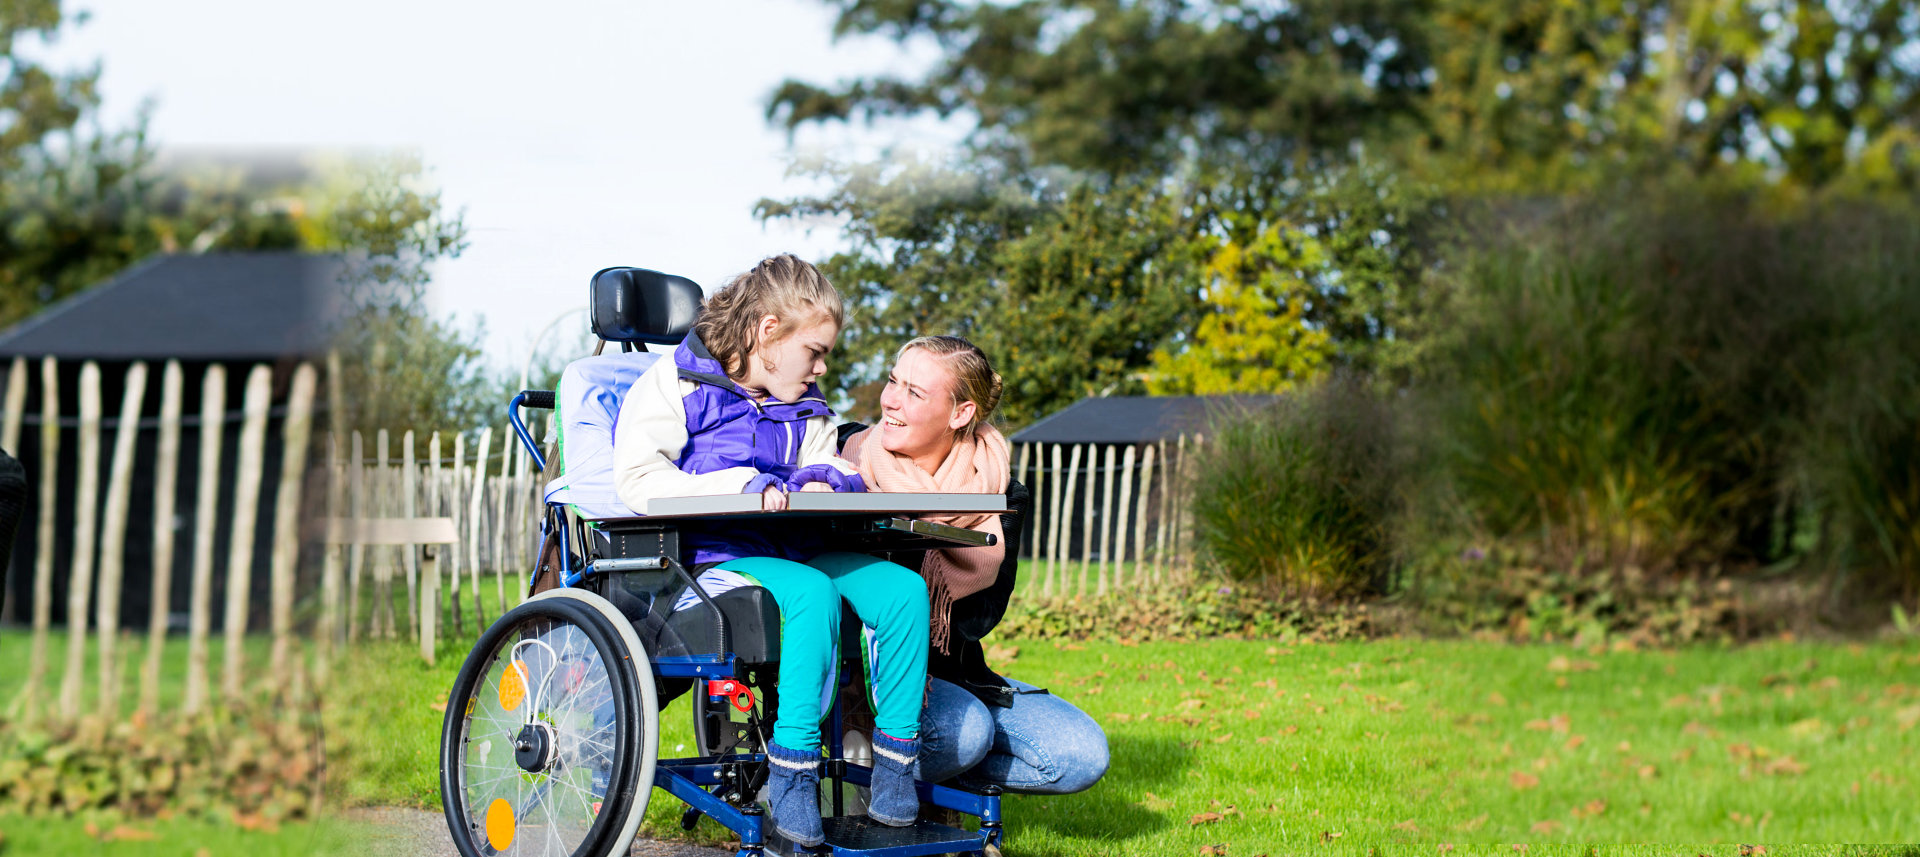 woman and girl with disability smiling